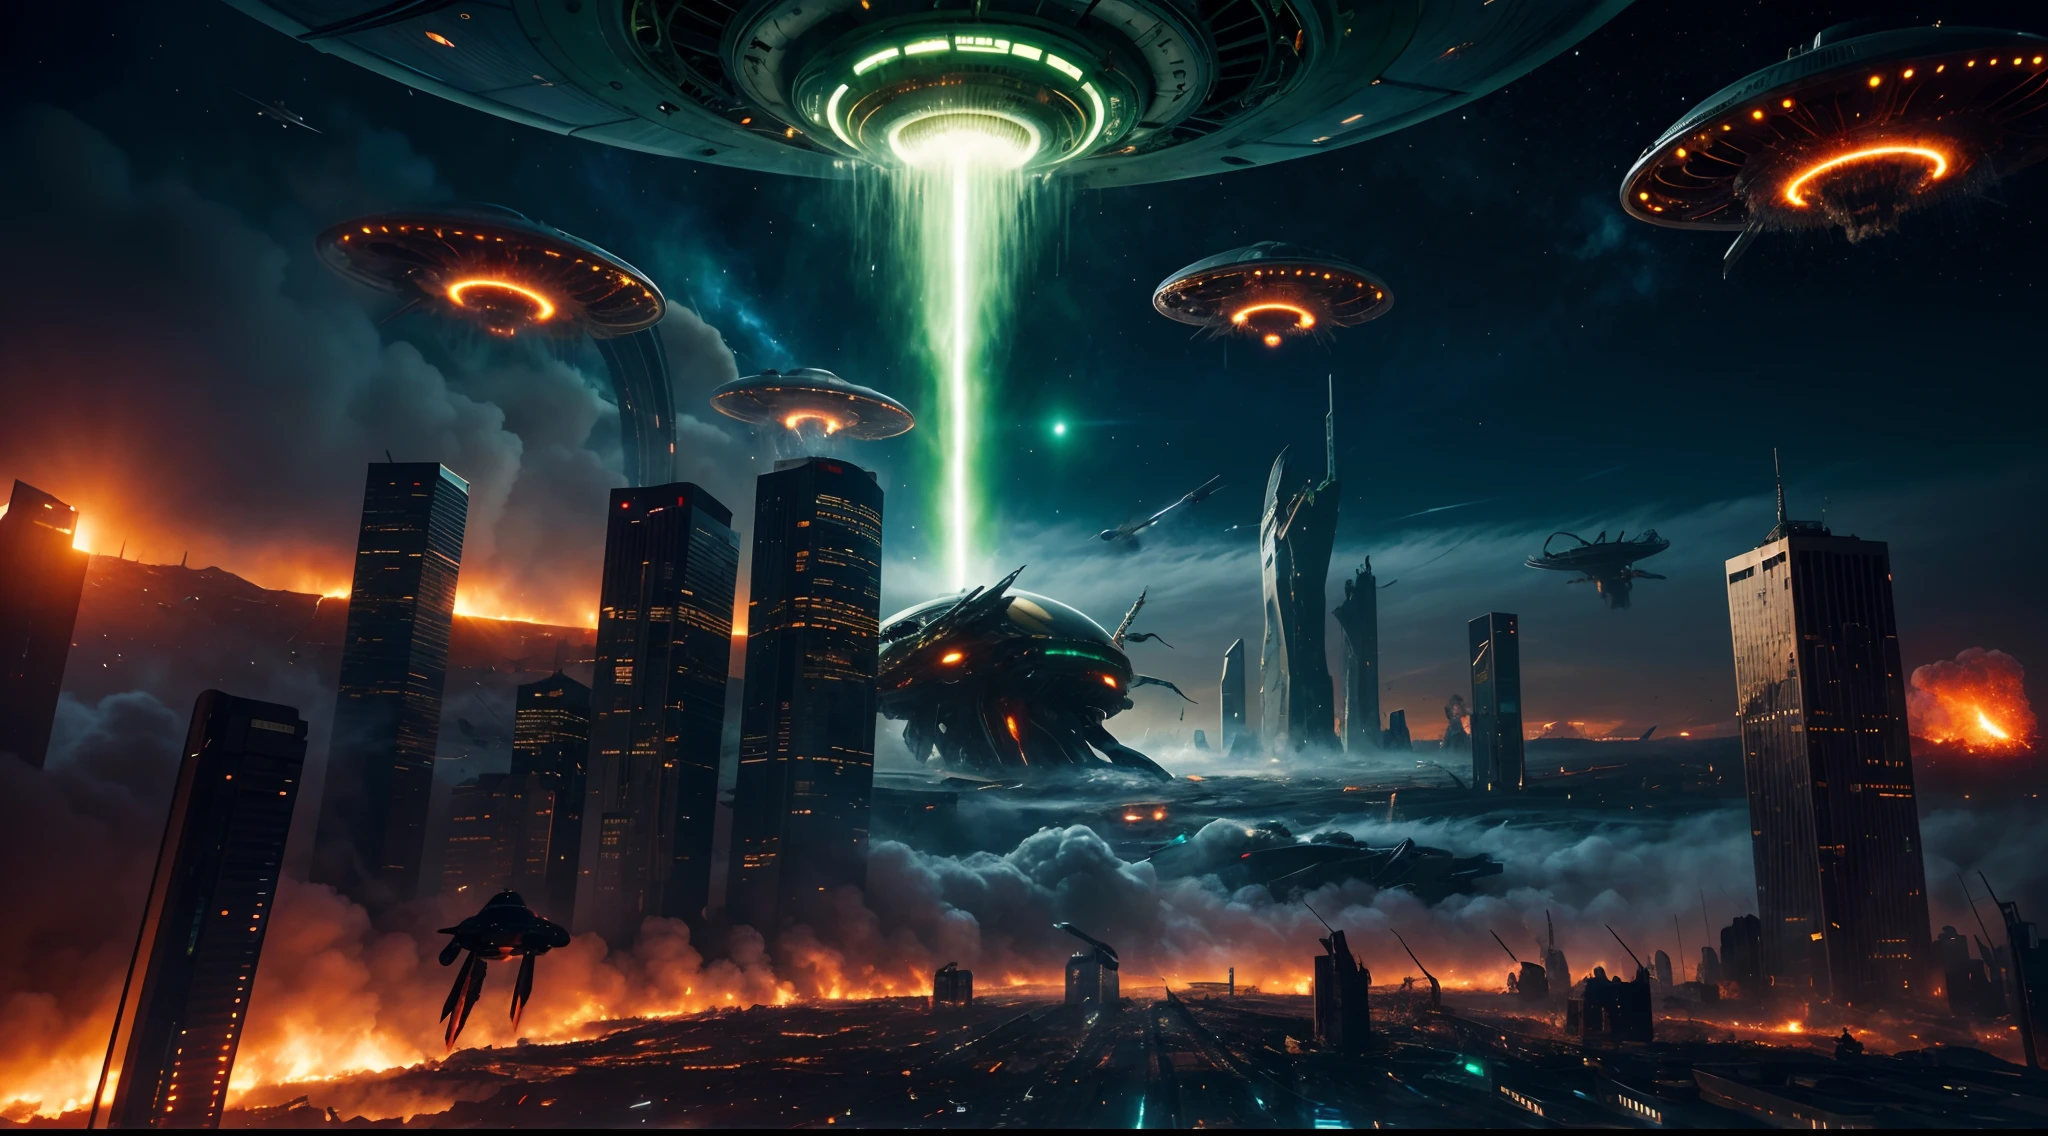 a dynamic digital illustration depicting a relentless alien invasion, where advanced spaceships swarm the skies with sinister intent. The cityscape below is ablaze with chaos as towering buildings crumble and panic sets in among the fleeing citizens. In the midst of this turmoil, A colossal extraterrestrial mothership hovers menacingly, casting an ominous green glow over the devastated landscape. The illustration captures the frantic energy of the invasion, using a blend of sci-fi realism and surrealism to evoke a sense of impending doom.